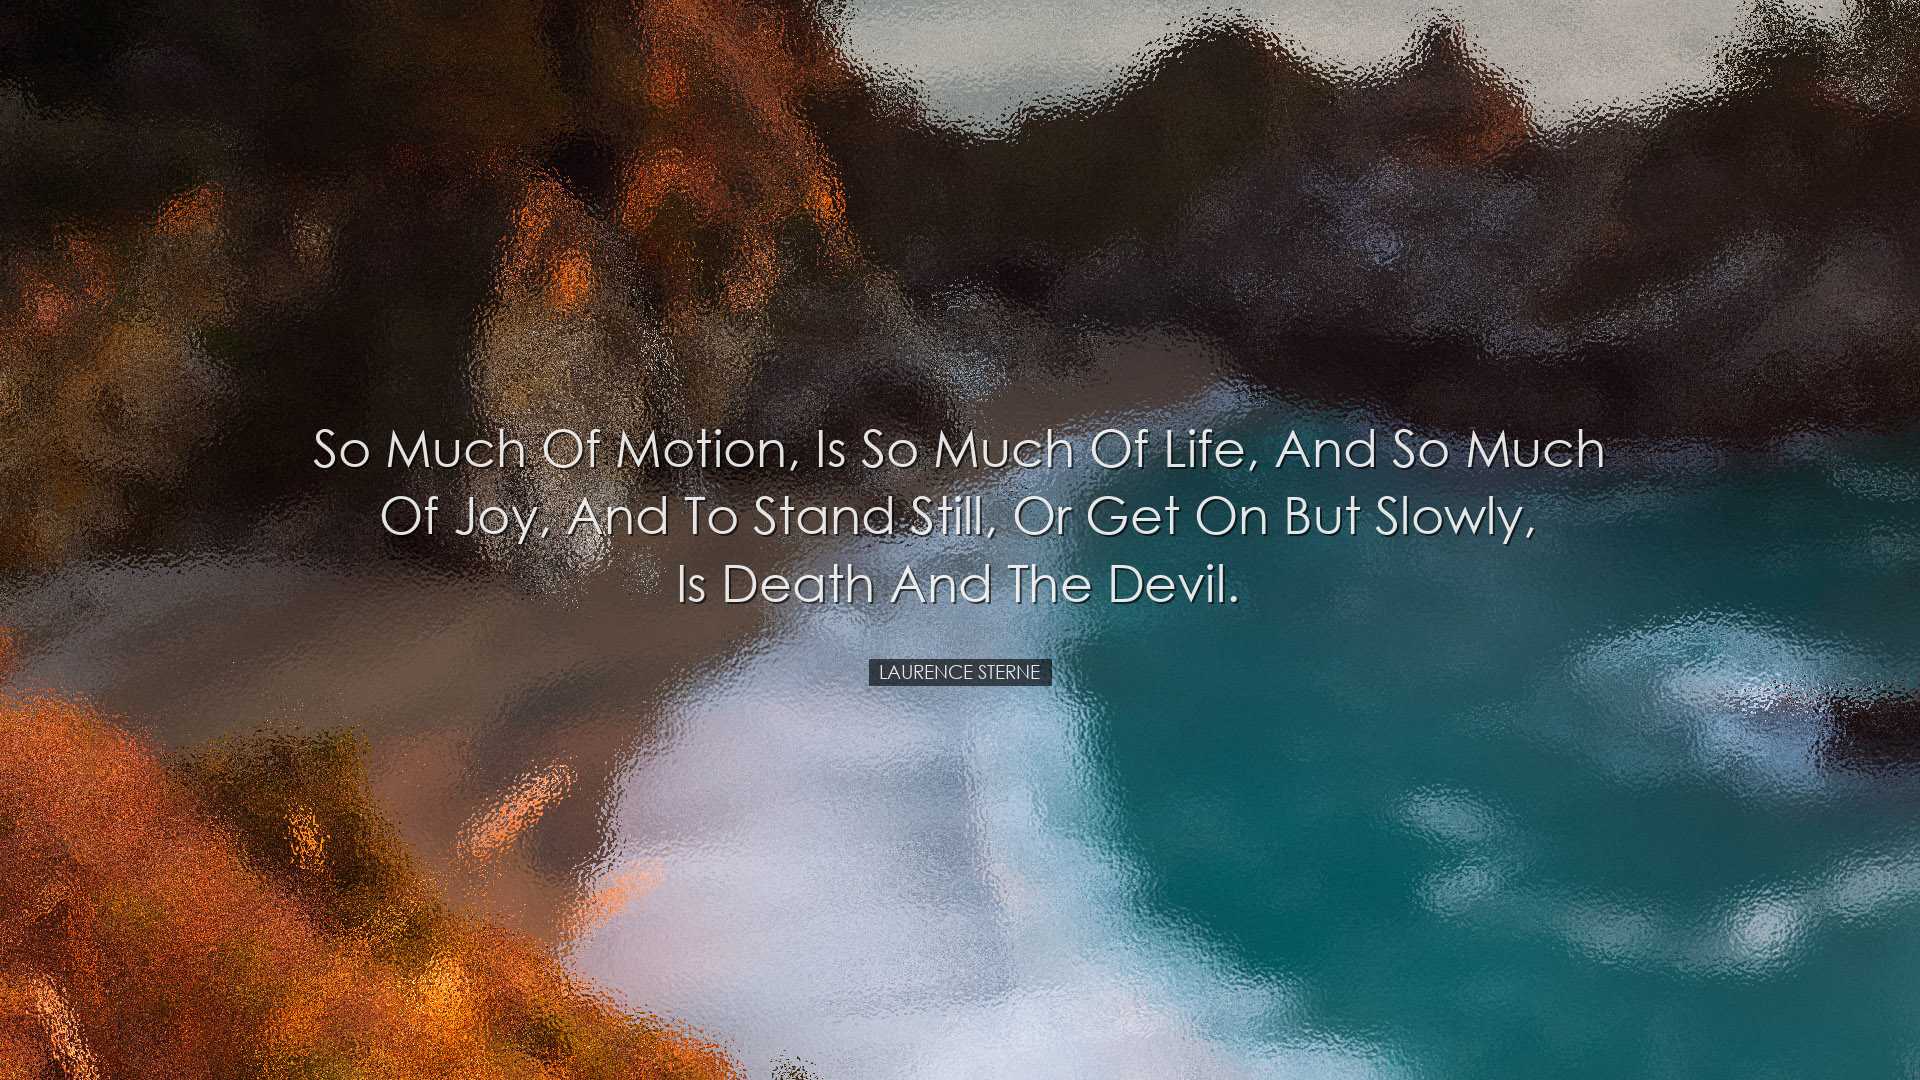 So much of motion, is so much of life, and so much of joy, and to